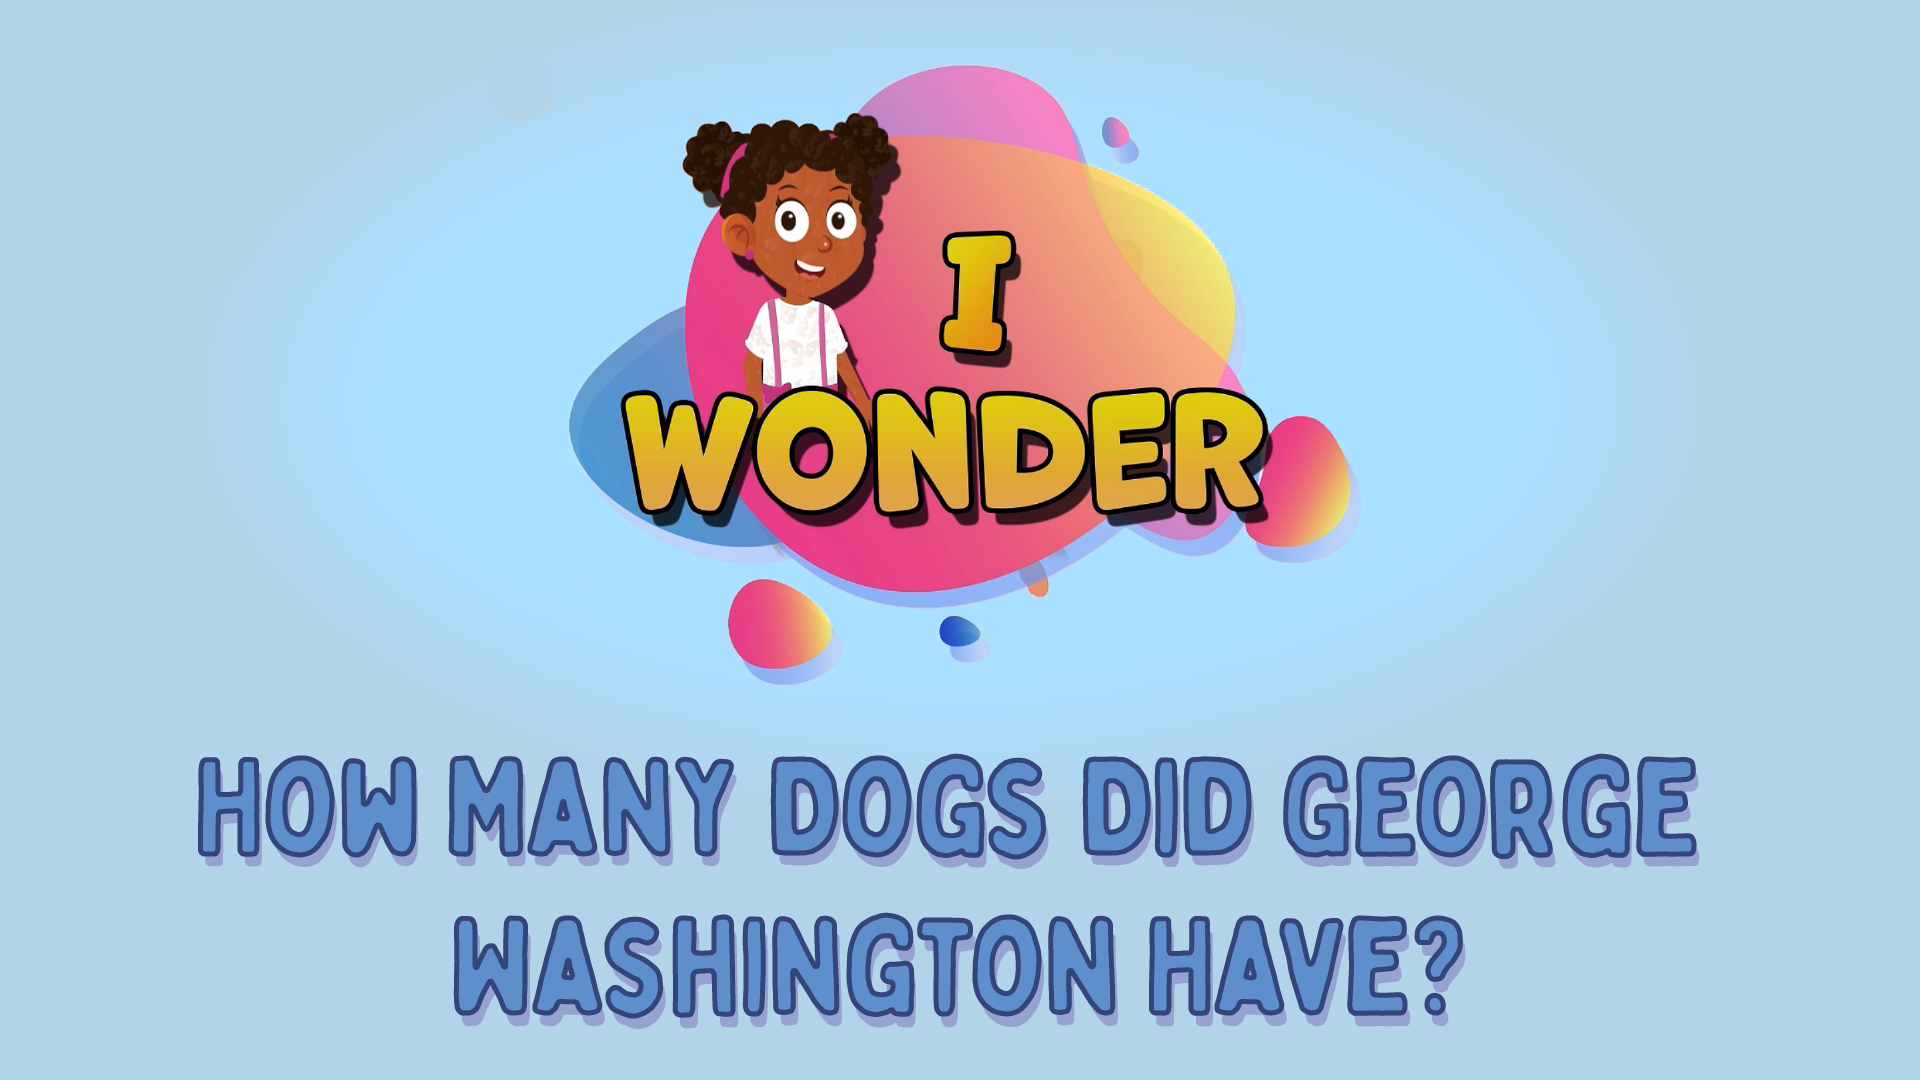 How Many Dogs Did George Washington Have?